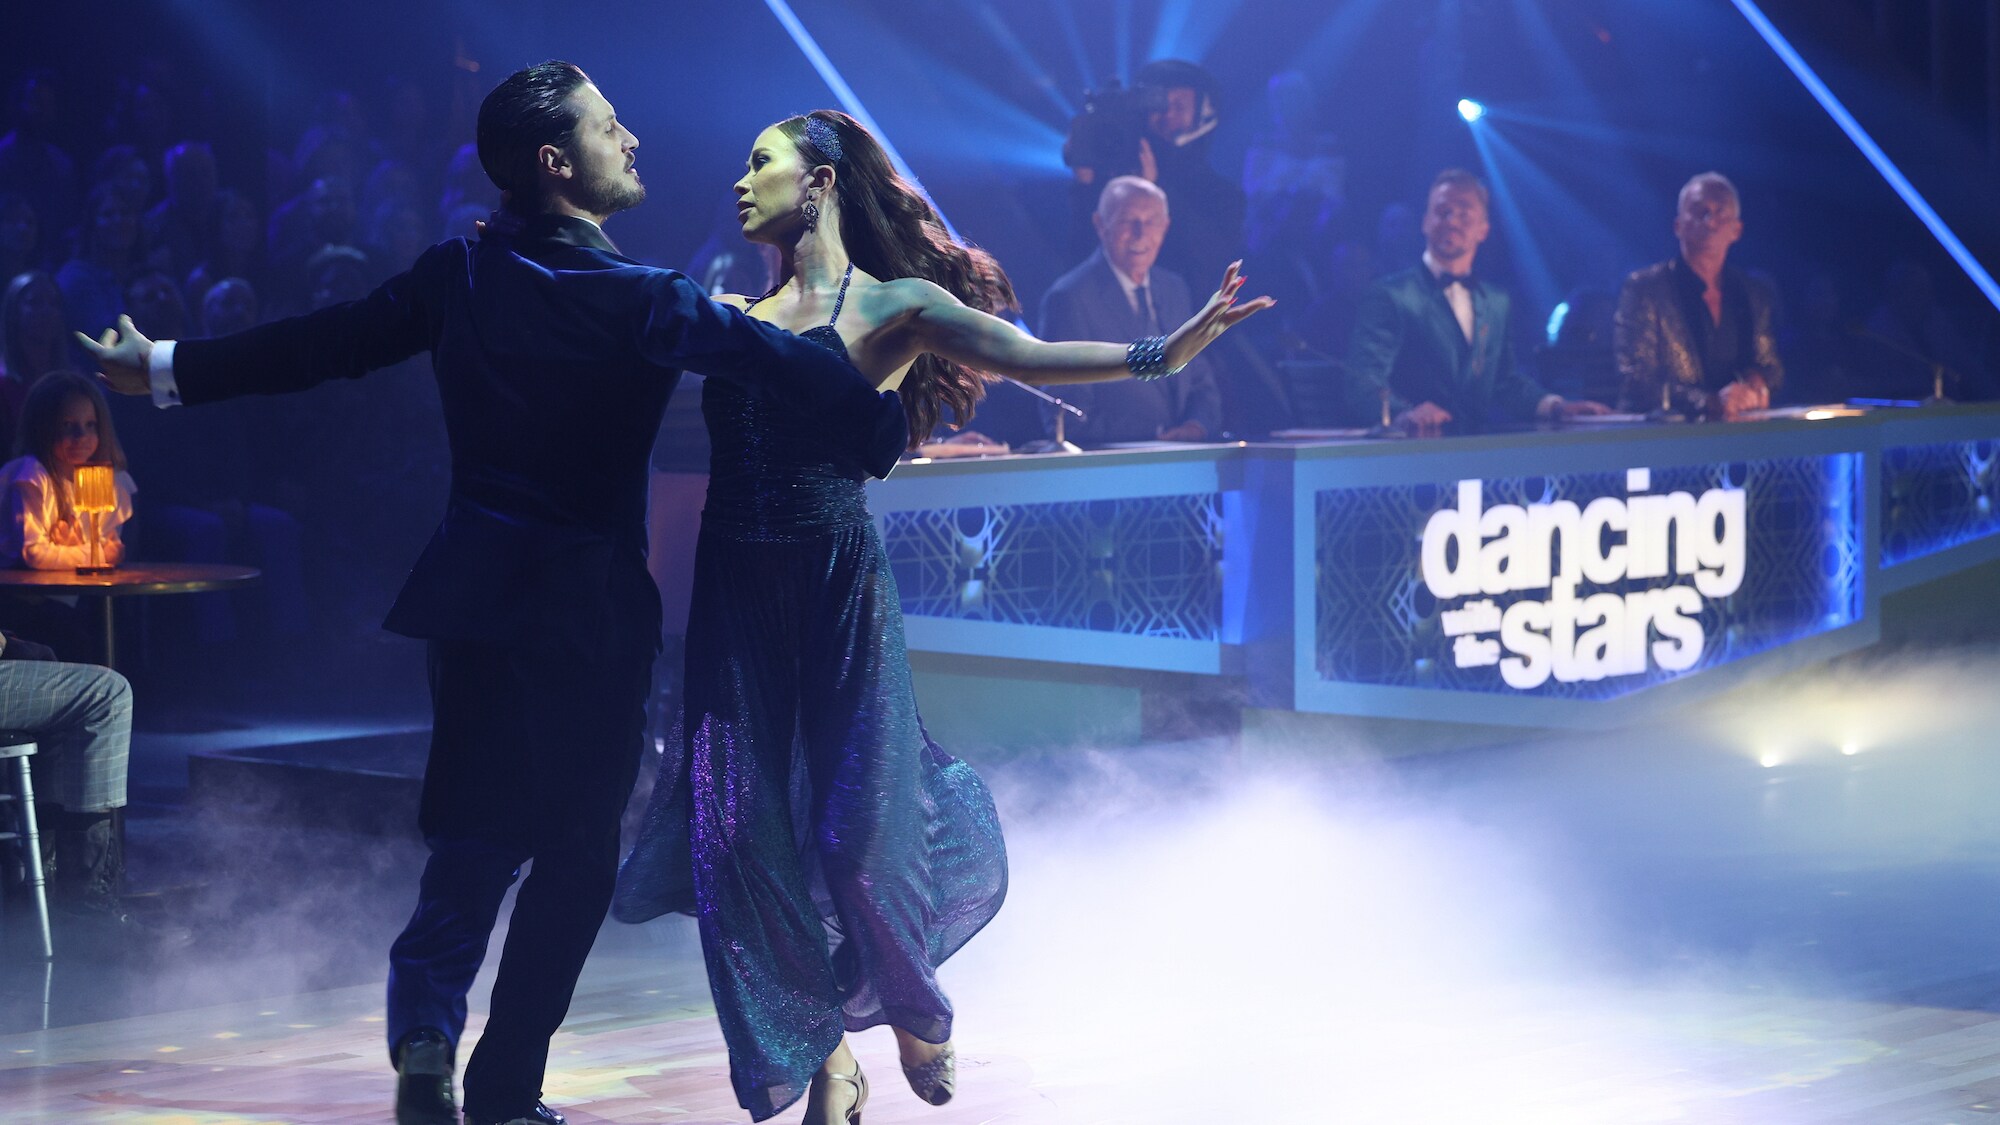 DANCING WITH THE STARS - “Semi-Finals” – The mirrorball competition heats up as the six remaining contestants head into the “Semi-Finals.” Each couple will perform two all-new routines as they fight for a spot in the finale. A new episode of “Dancing with the Stars” will stream live MONDAY, NOV. 14 (8:00pm ET / 5:00pm PT), on Disney+. (ABC/Raymond Liu) VAL CHMERKOVSKIY, GABBY WINDEY